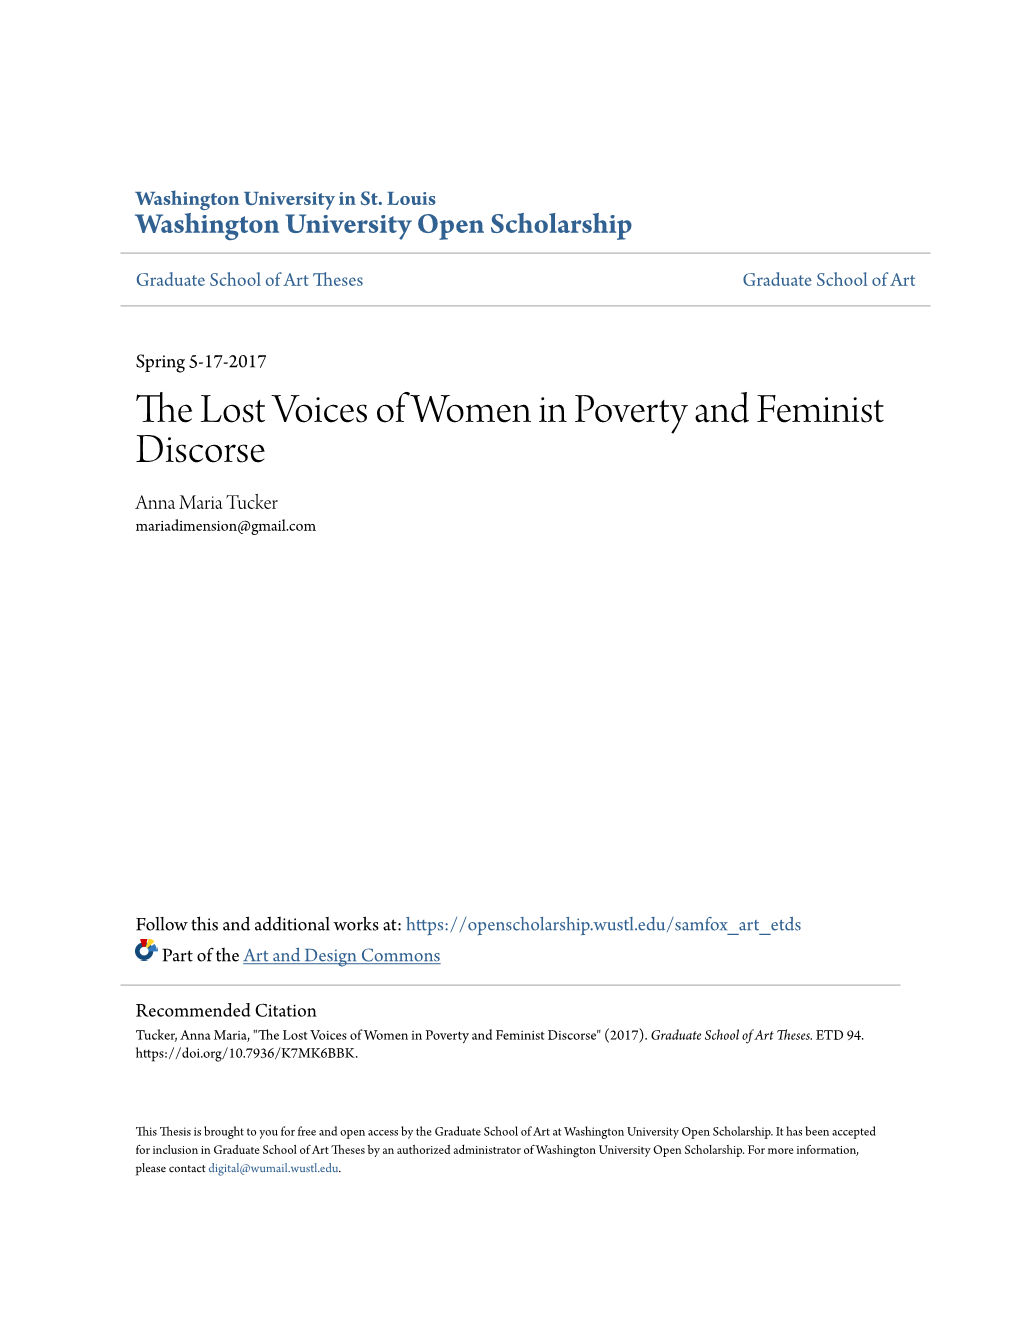 The Lost Voices of Women in Poverty and Feminist Discorse Anna Maria Tucker Mariadimension@Gmail.Com